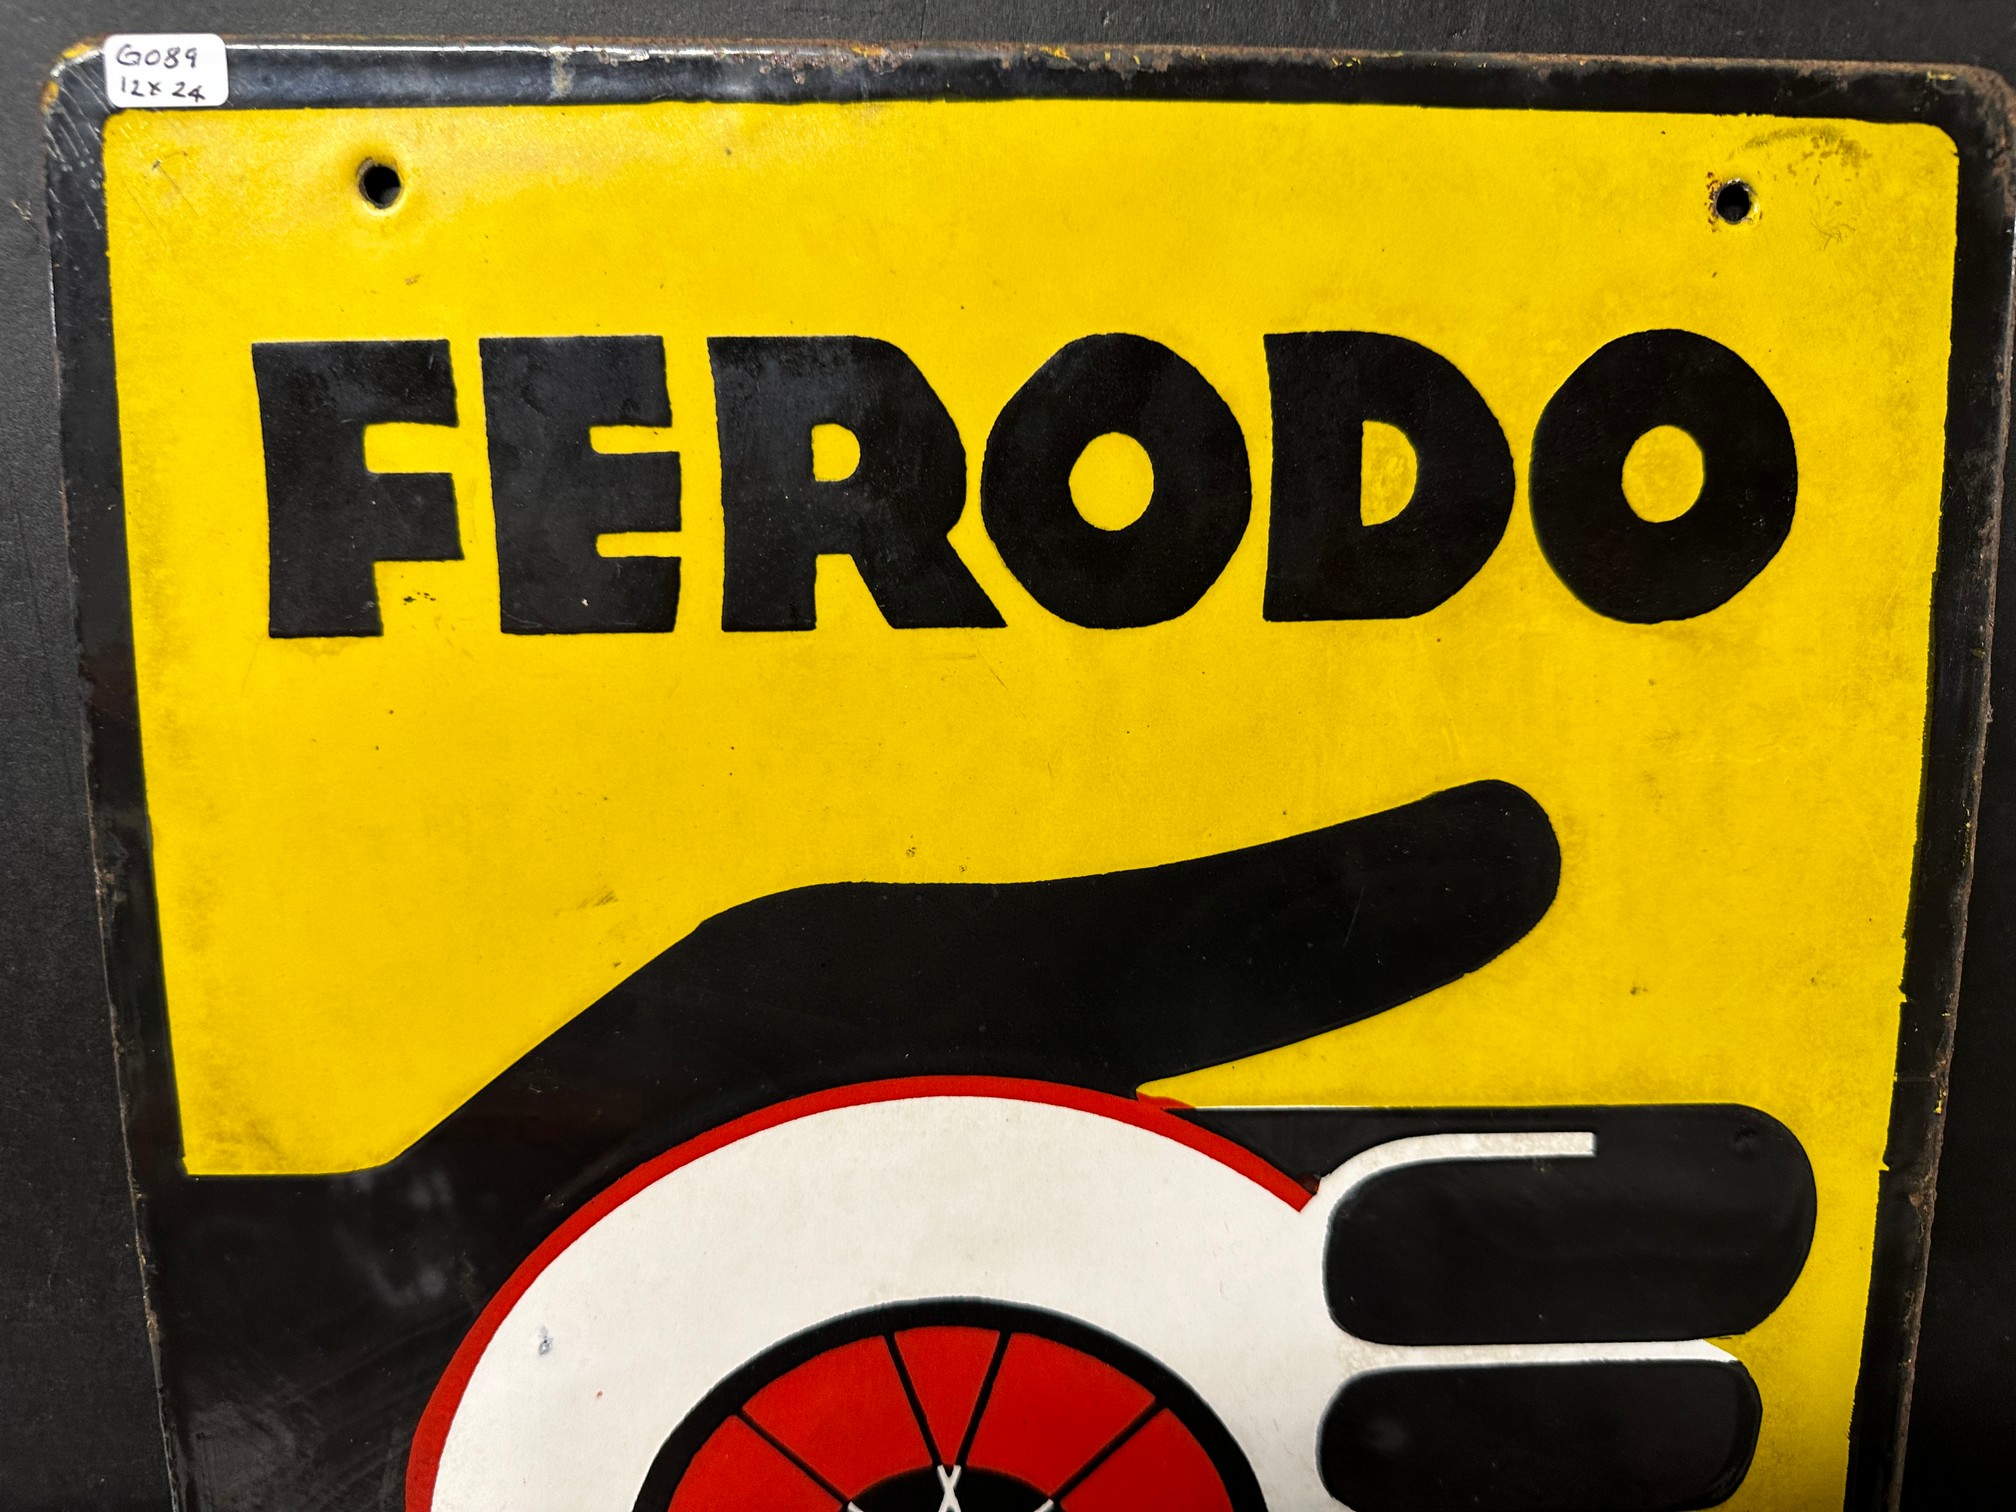 A Ferodo Brake Testing Service pictorial double sided enamel advertising sign depicting a hand - Image 8 of 10